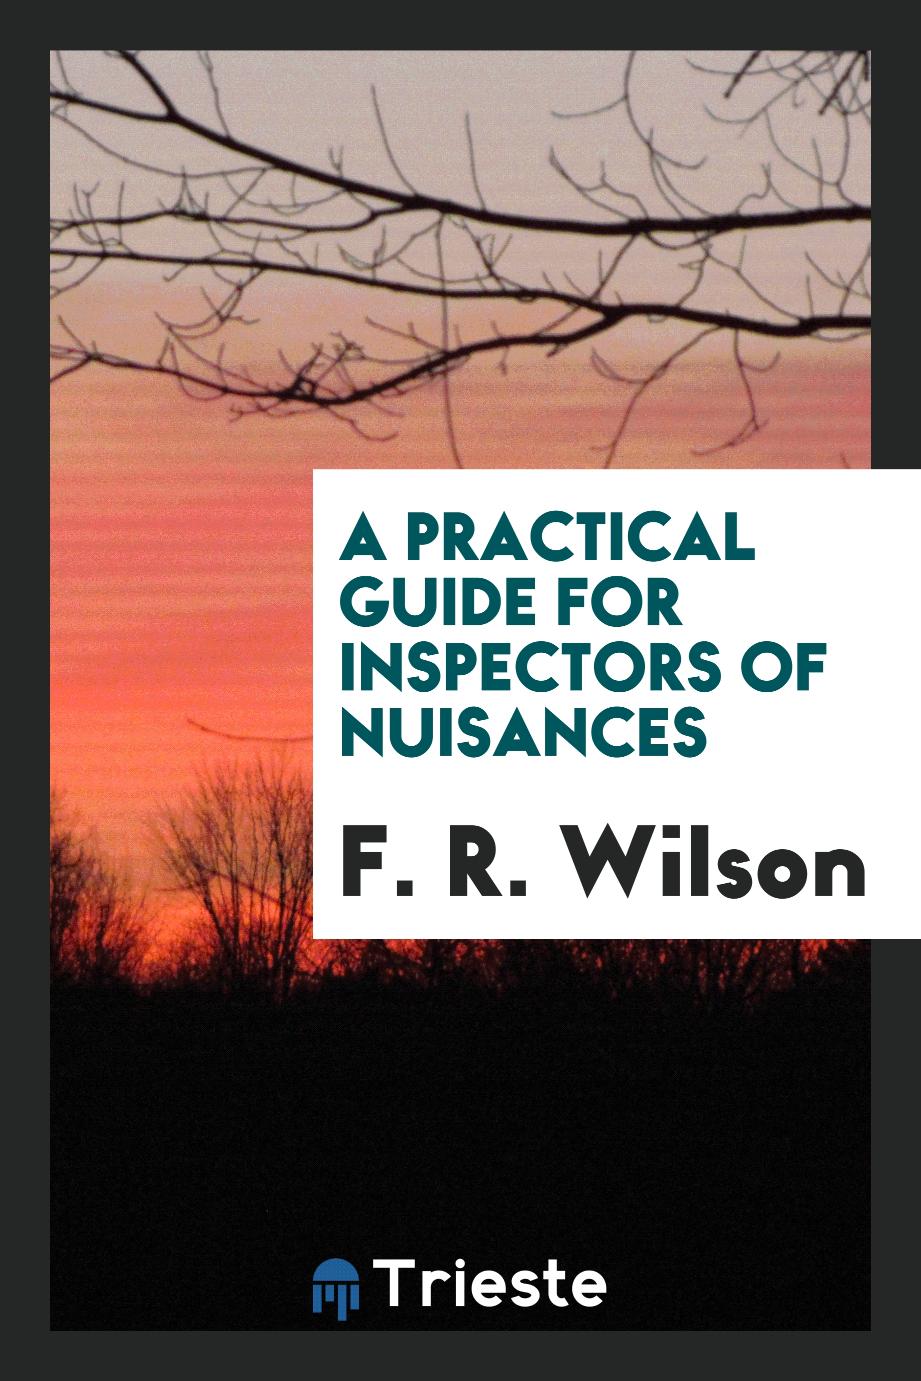 A Practical Guide for Inspectors of Nuisances